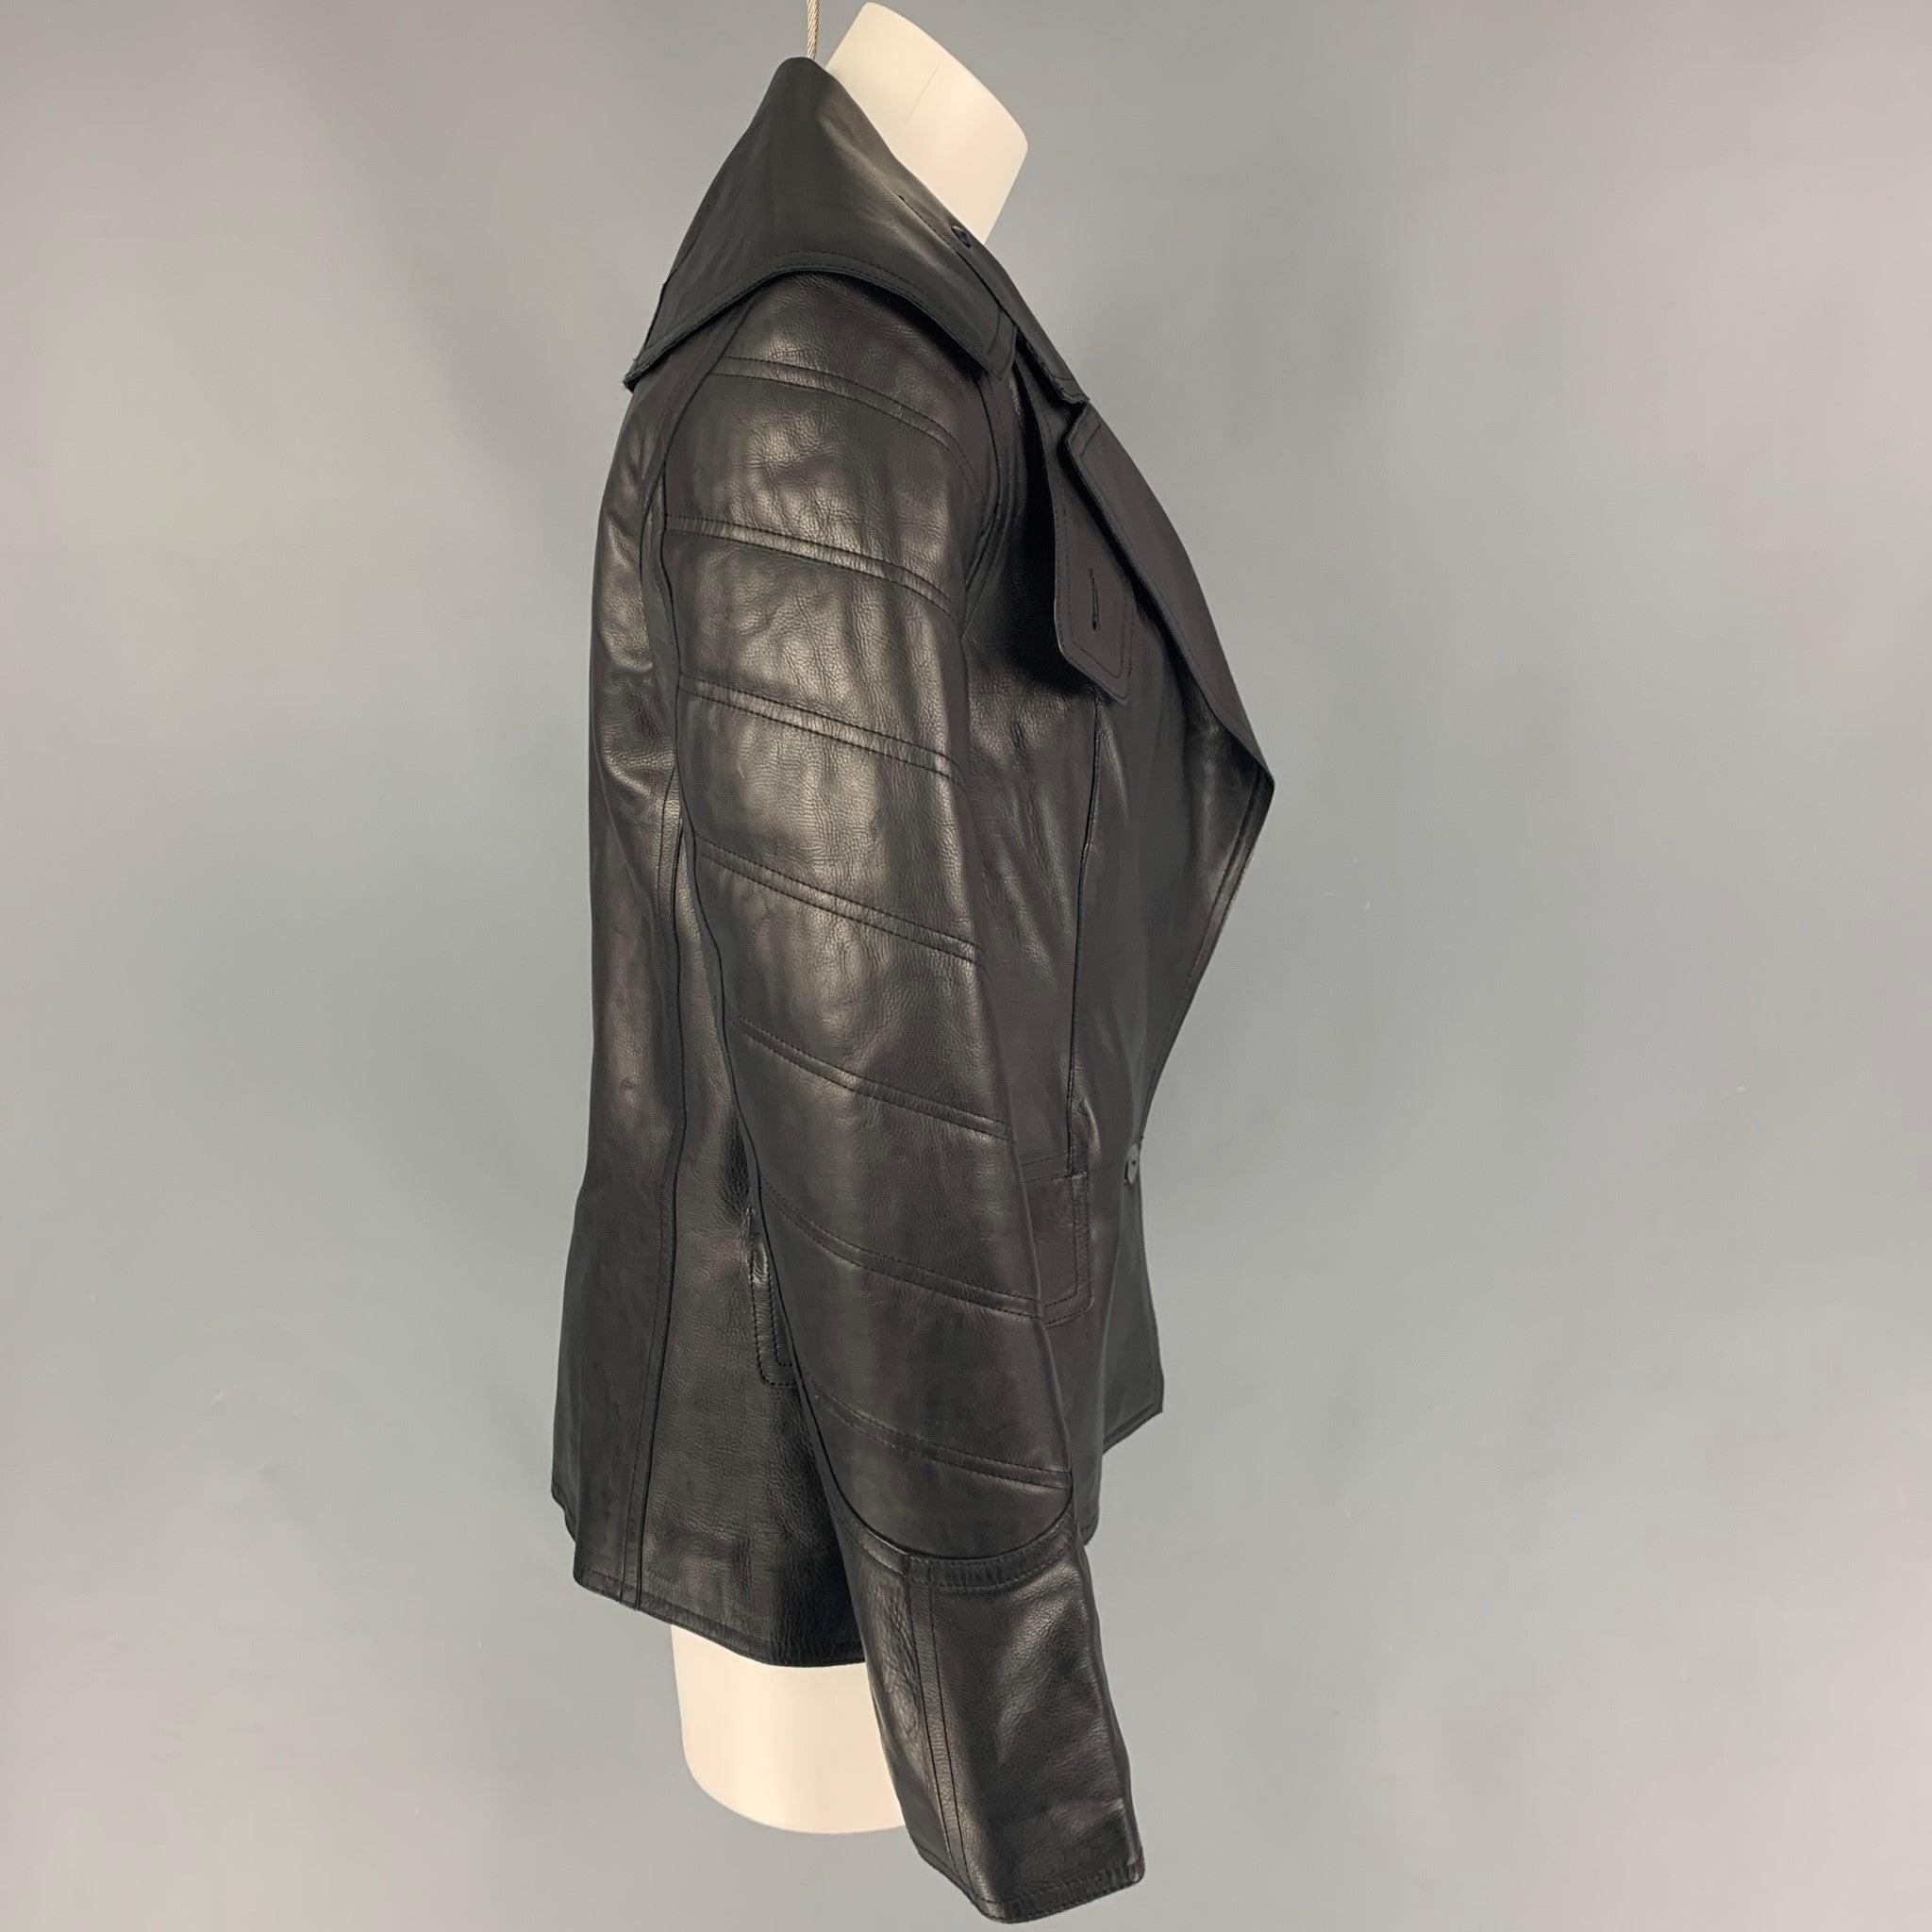 ALEXANDER WANG jacket comes in a black quilted calf skin leather featuring a large notch lapel, flap pockets, and a double button closure.
New With Tags.
 

Marked:   S 

Measurements: 
 
Shoulder: 16 inches  Bust: 34 inches  Sleeve: 23 inches 